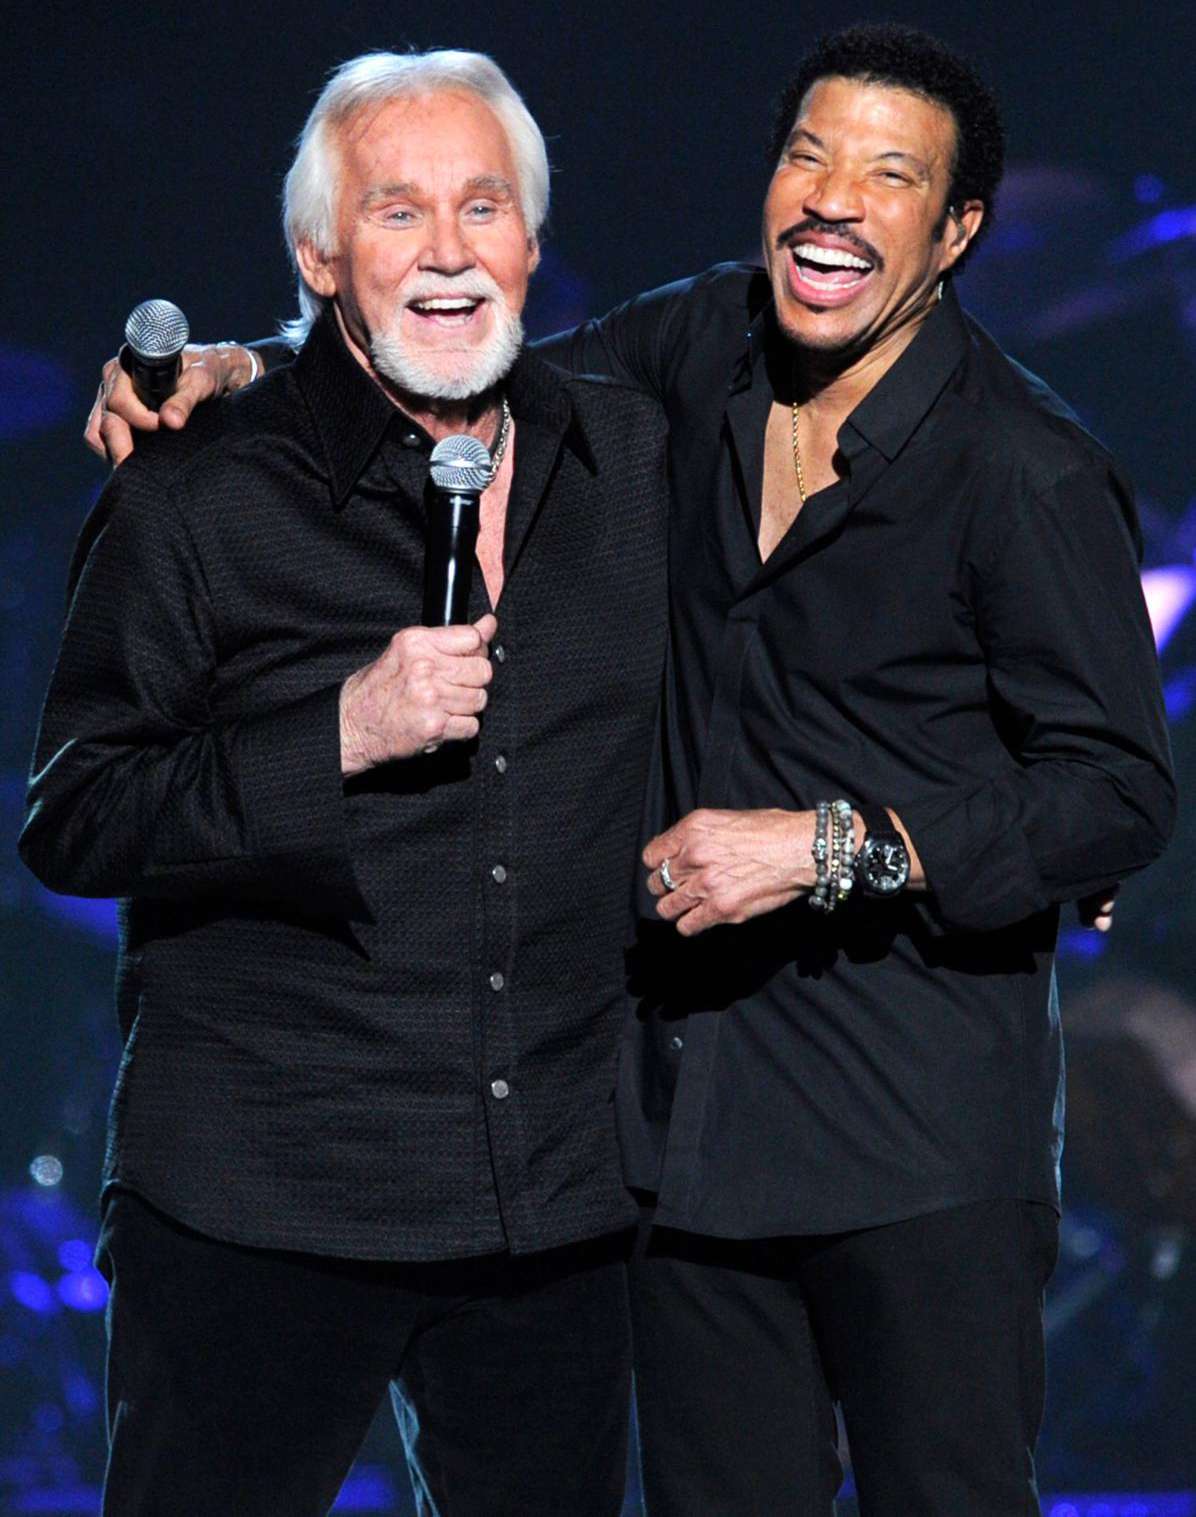 Lionel Richie and kenny rogers